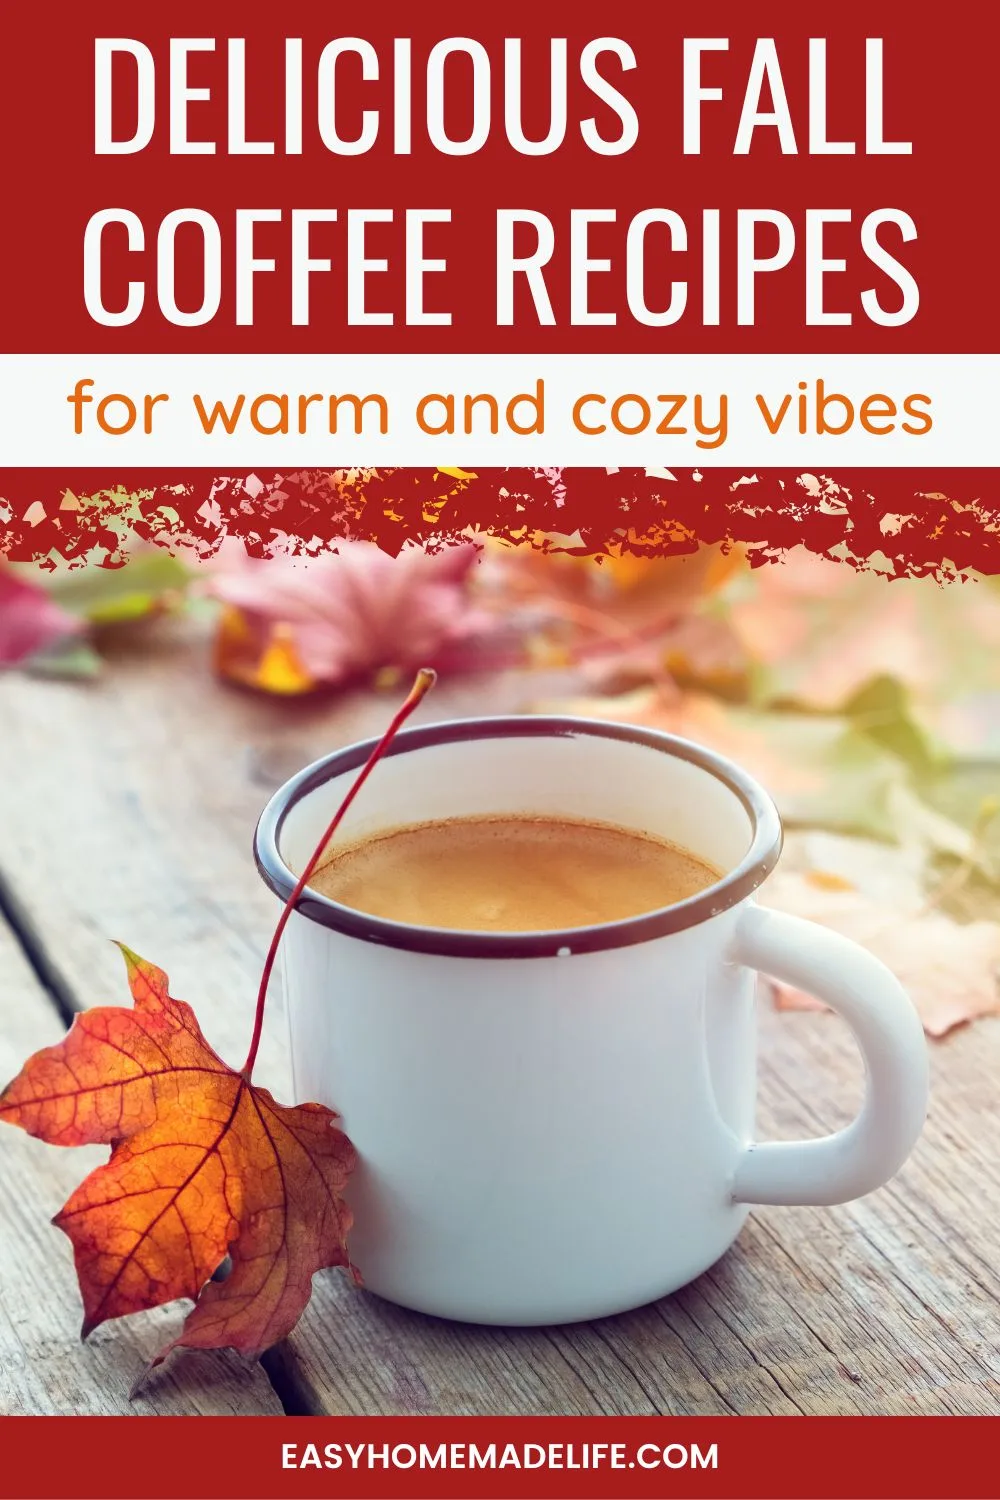 Delicious fall coffee recipes for warm and cozy vibes.